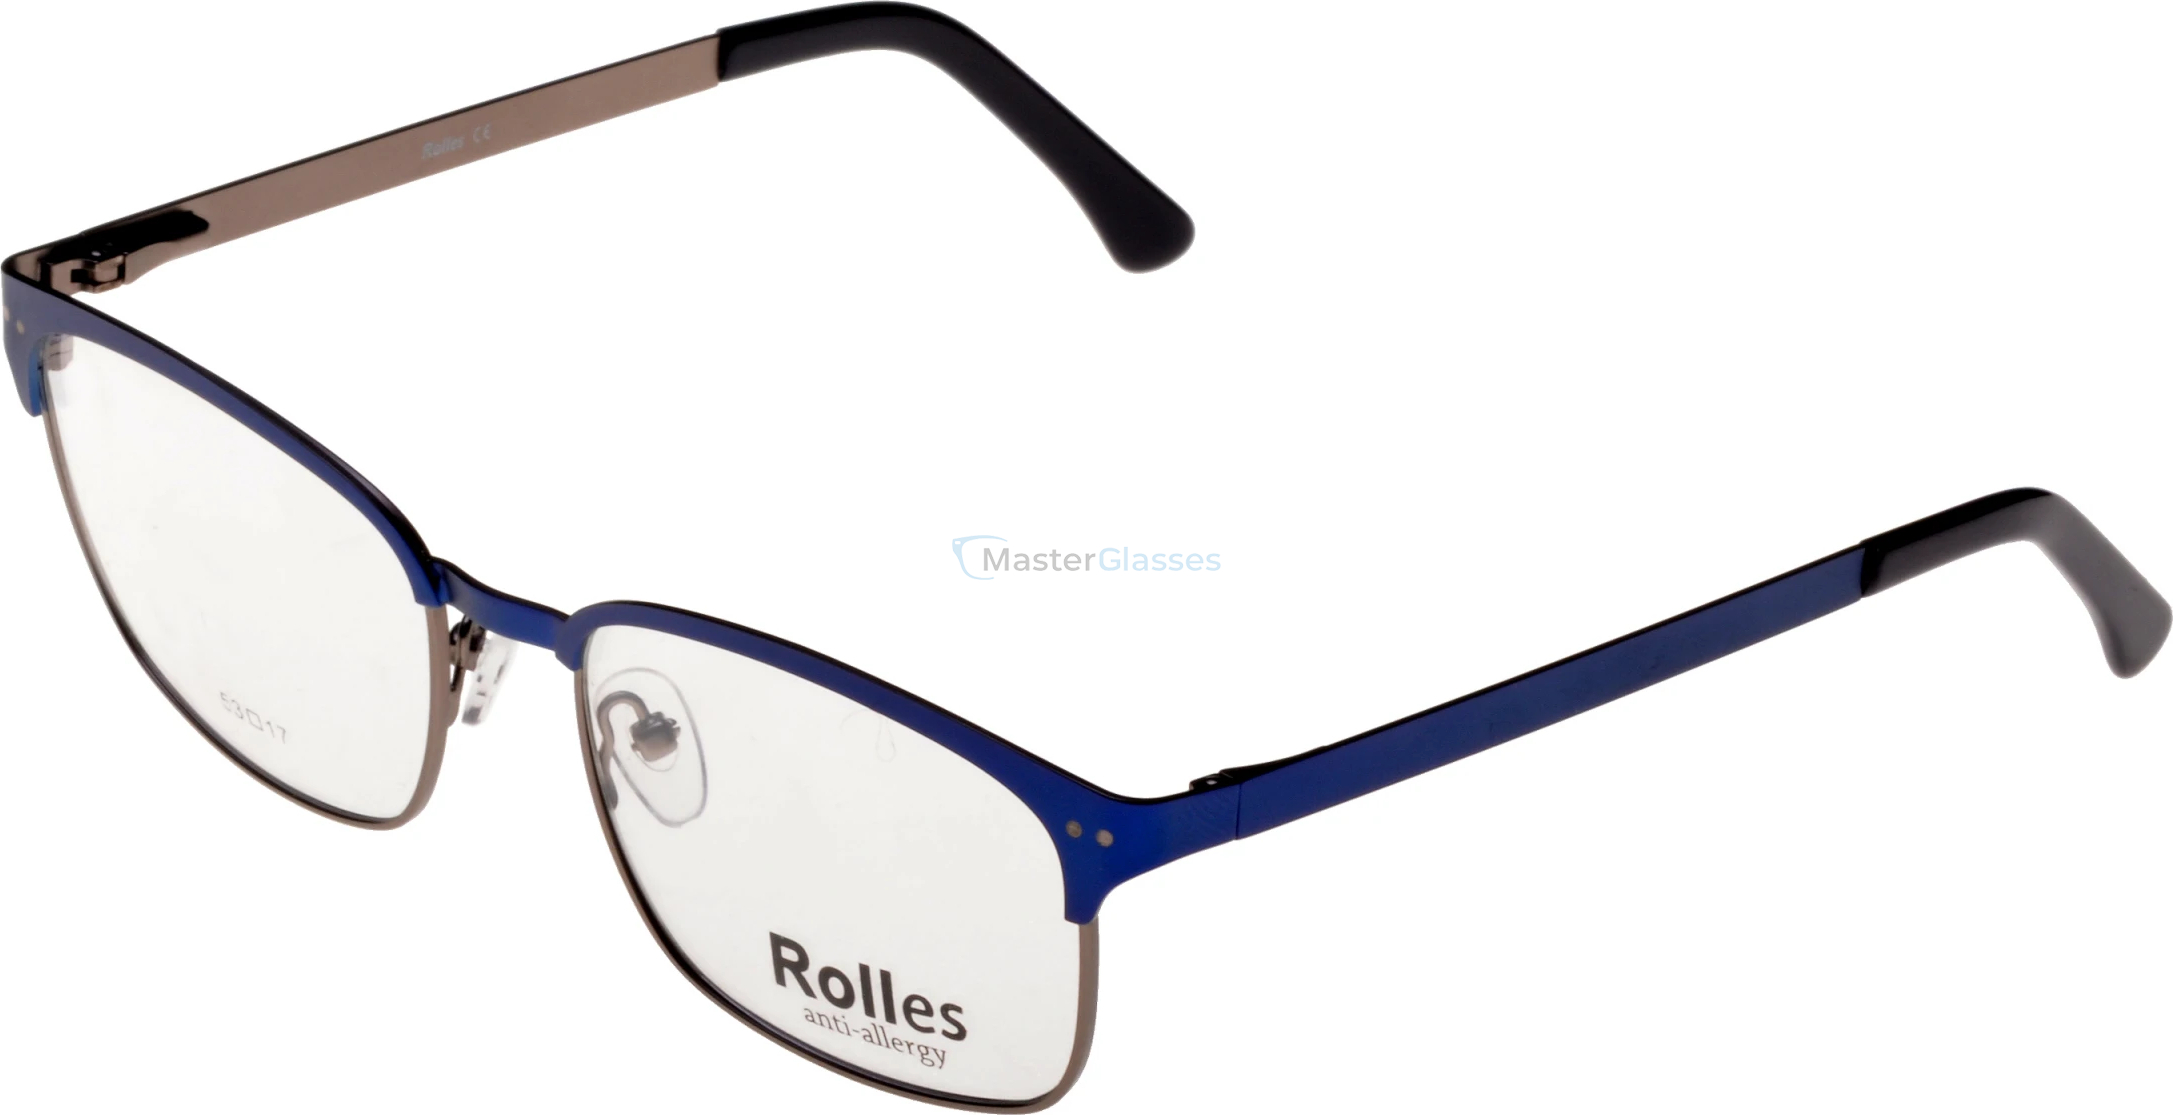  Rolles 464 02